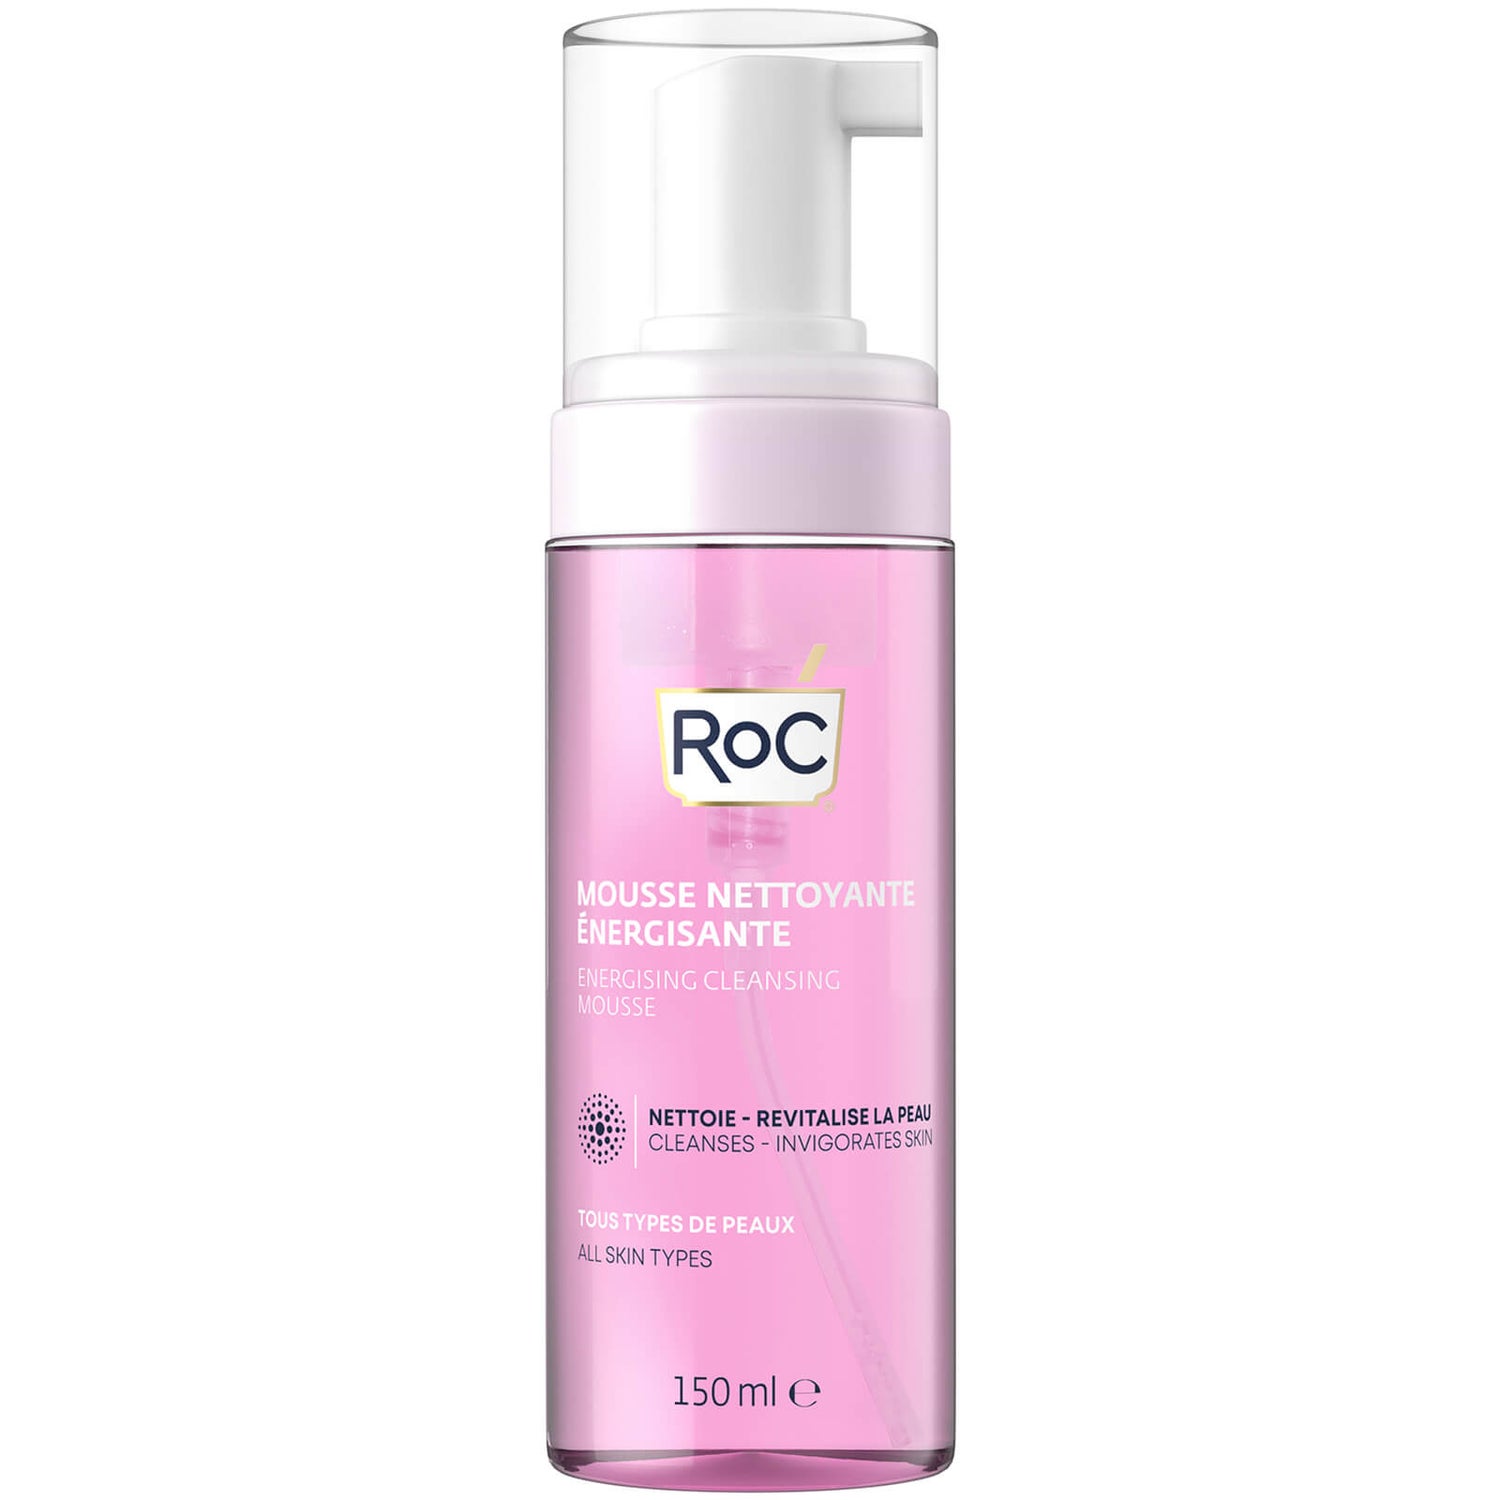 RoC Energising Cleansing Mousse 150ml